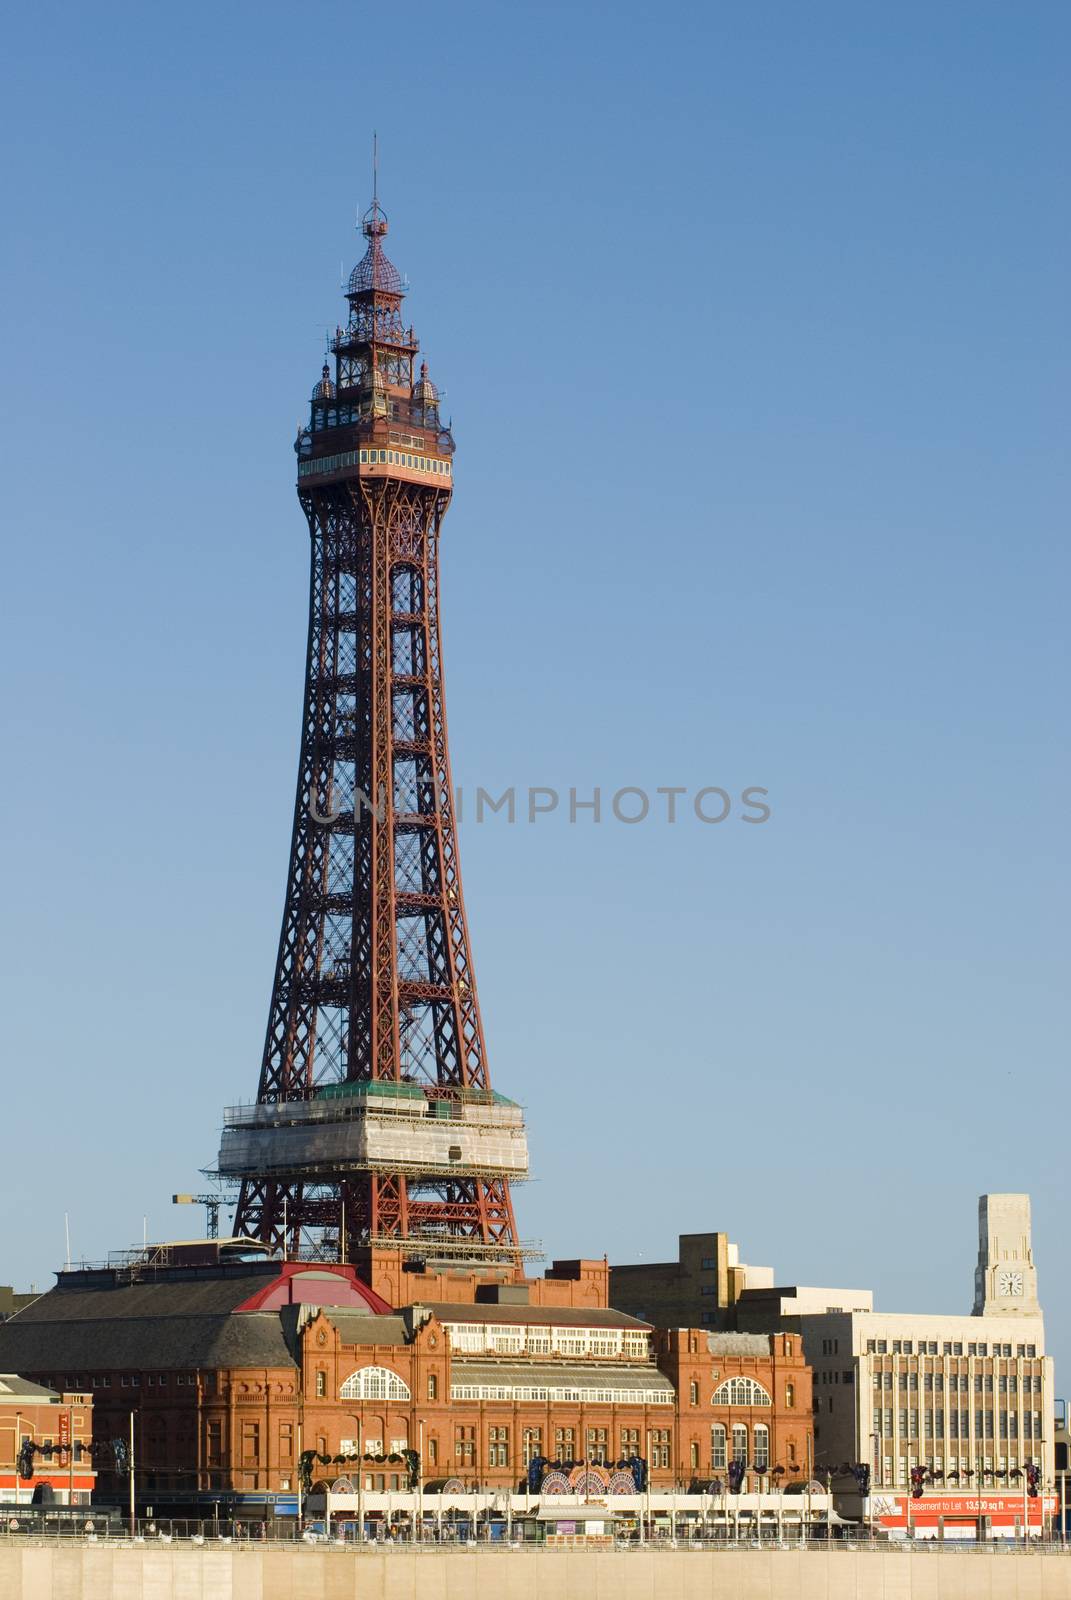 Blackpool Tower, Blackpool, England is a Victorian steel lattice tower on the waterfront of the town and a well known historical landmark